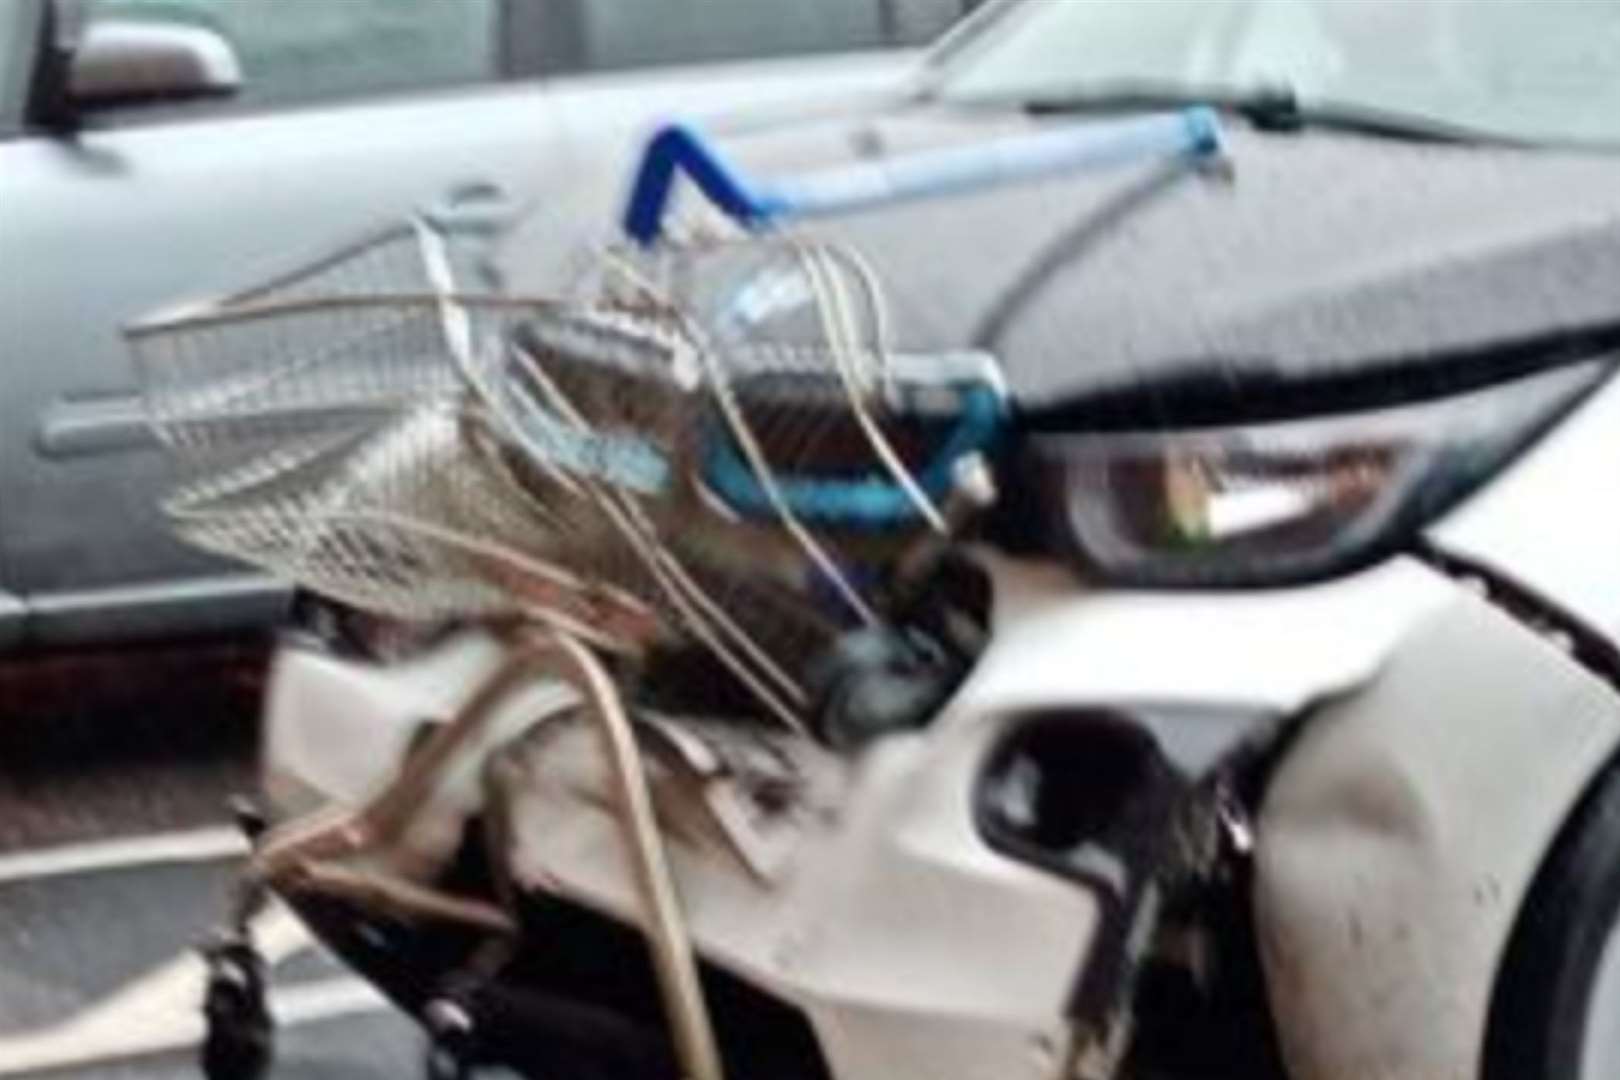 The all-electric BMW i3 suffered heavy damage